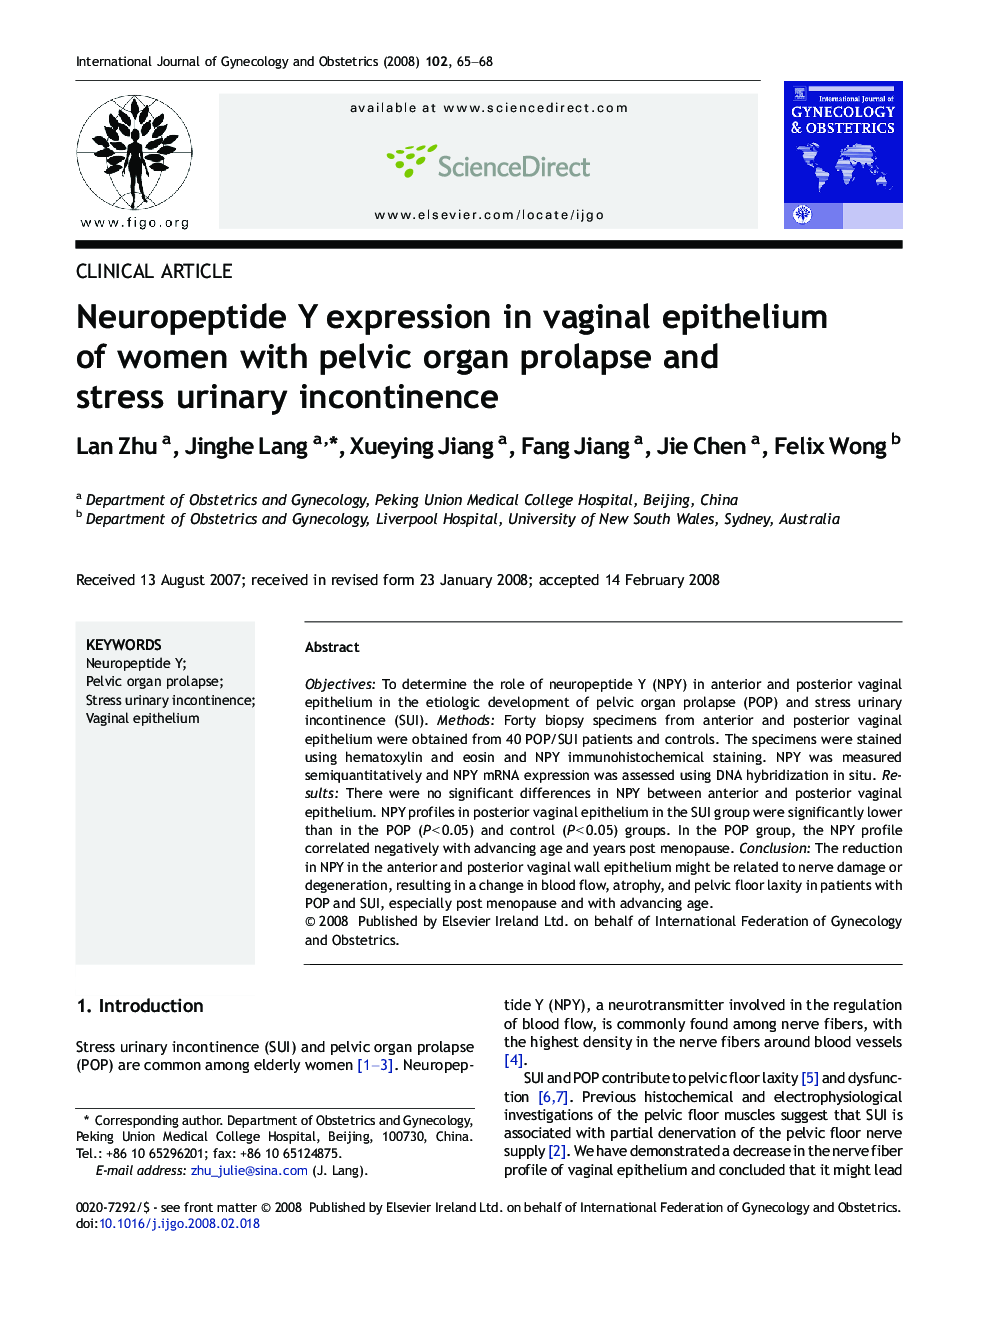 Neuropeptide Y expression in vaginal epithelium of women with pelvic organ prolapse and stress urinary incontinence